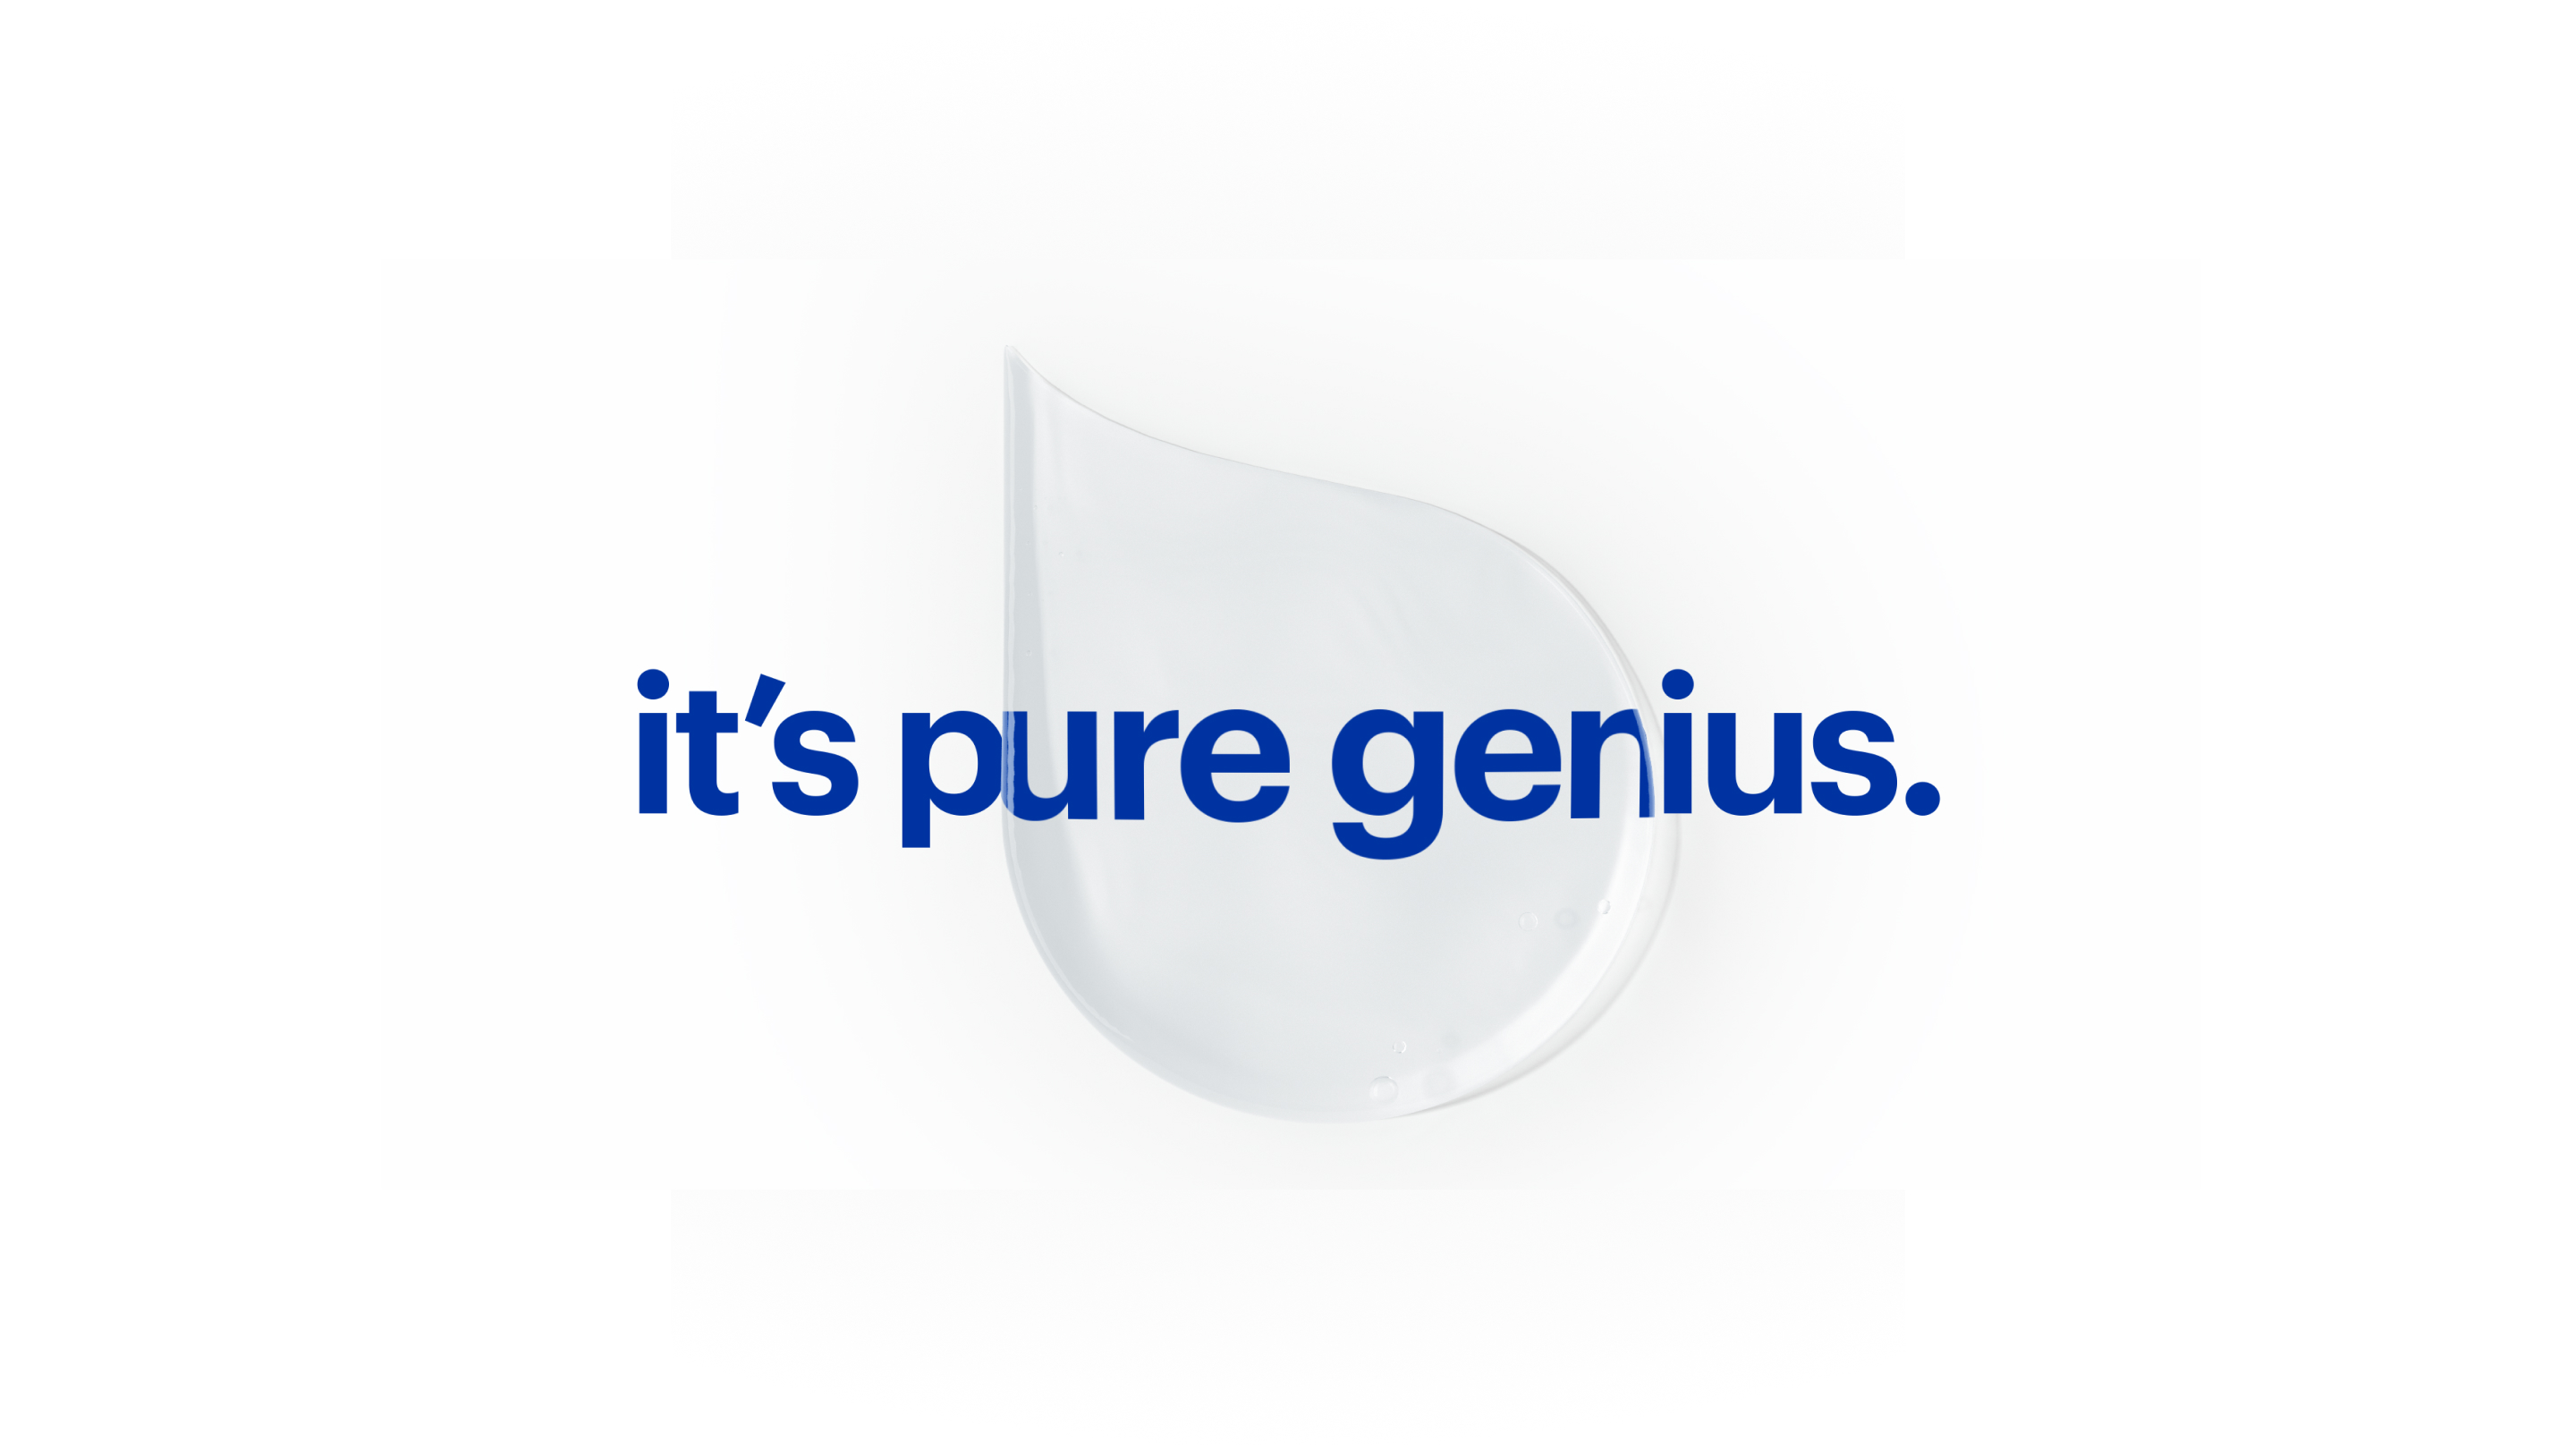 The phrase "it's pure genius." in front of a drop of water on with background